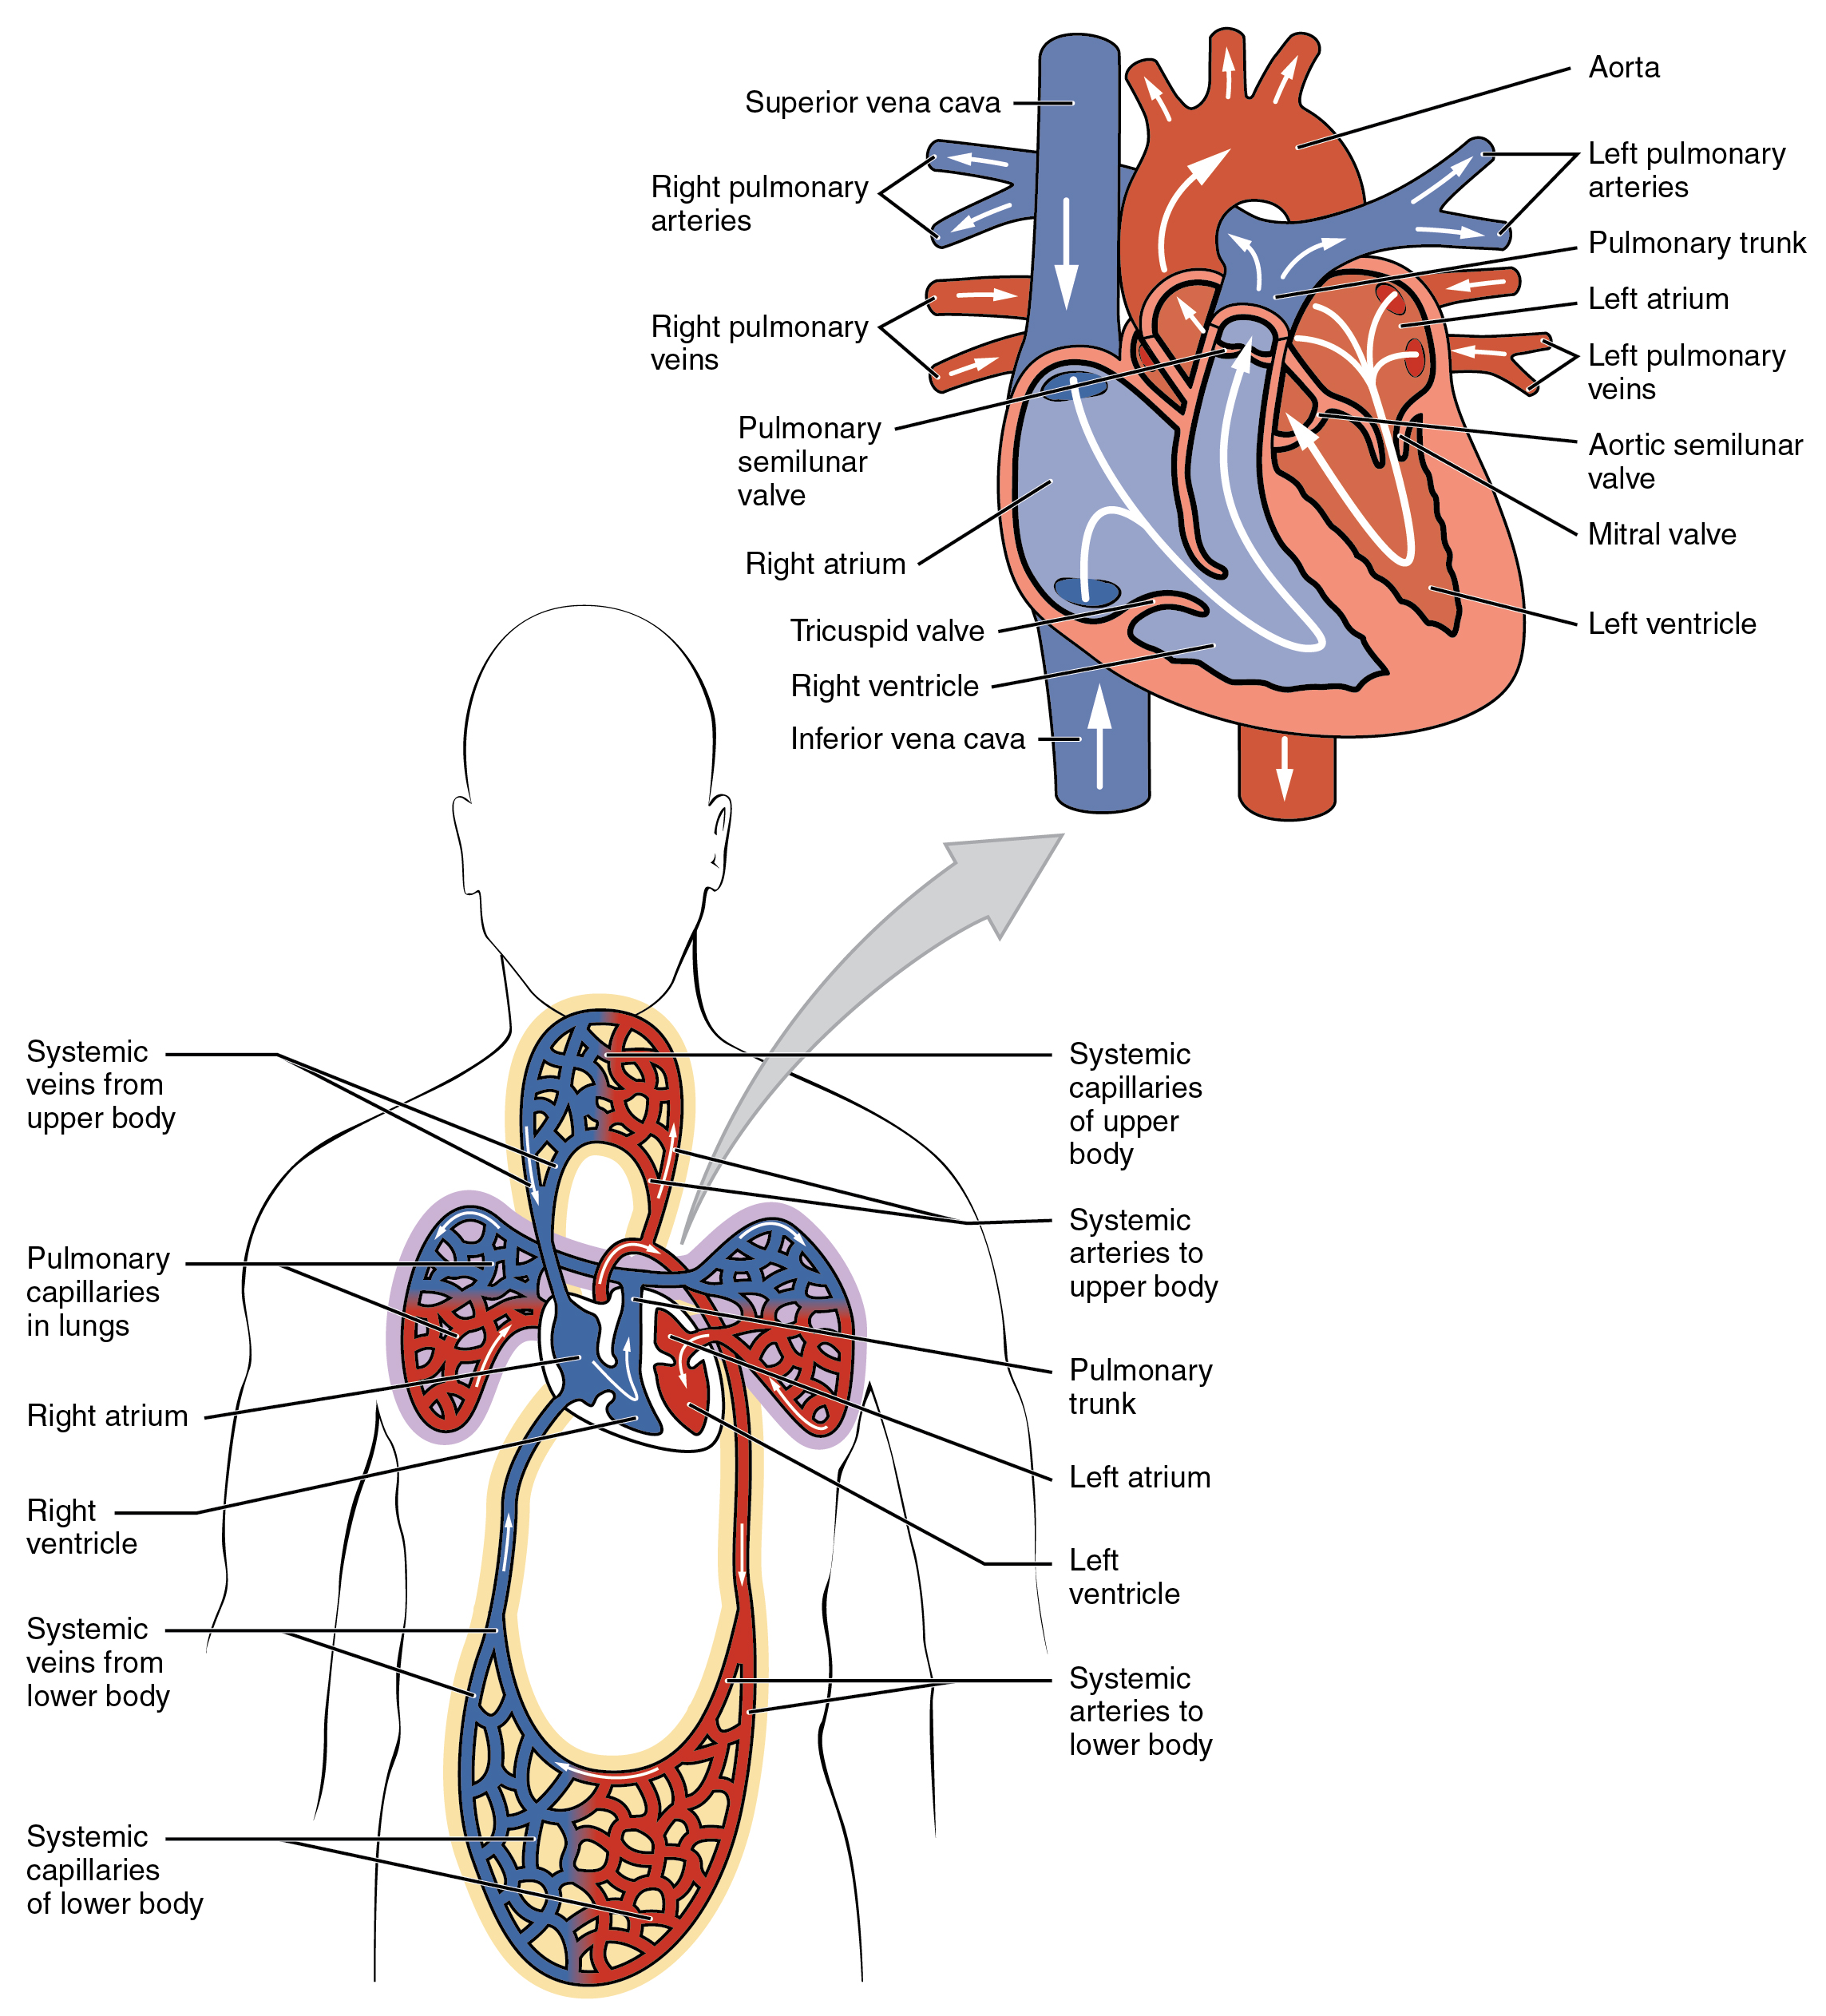 The top panel shows the human heart with the arteries and veins labeled (from top, clockwise): aorta, left pulmonary arteries, pulmonary trunk, left atrium, left pulmonary veins, aortic semilunar valve, mitral valve, left ventricle, inferior vena cava, right ventricle, tricuspid valve, right atrium, pulmonary semilunar valve, right pulmonary veins, right pulmonary arteries, superior vena cava. The bottom panel shows a rough map of the the human circulatory system. Labels read (from top, clockwise): systemic capillaries of upper body, systemic arteries to upper body, pulmonary trunk, left atrium, left ventricle, systemic arteries to lower body, systemic capillaries of lower body, systemic veins from lower body, right ventricle, right atrium, pulmonary capillaries in lungs, systemic veins from upper body